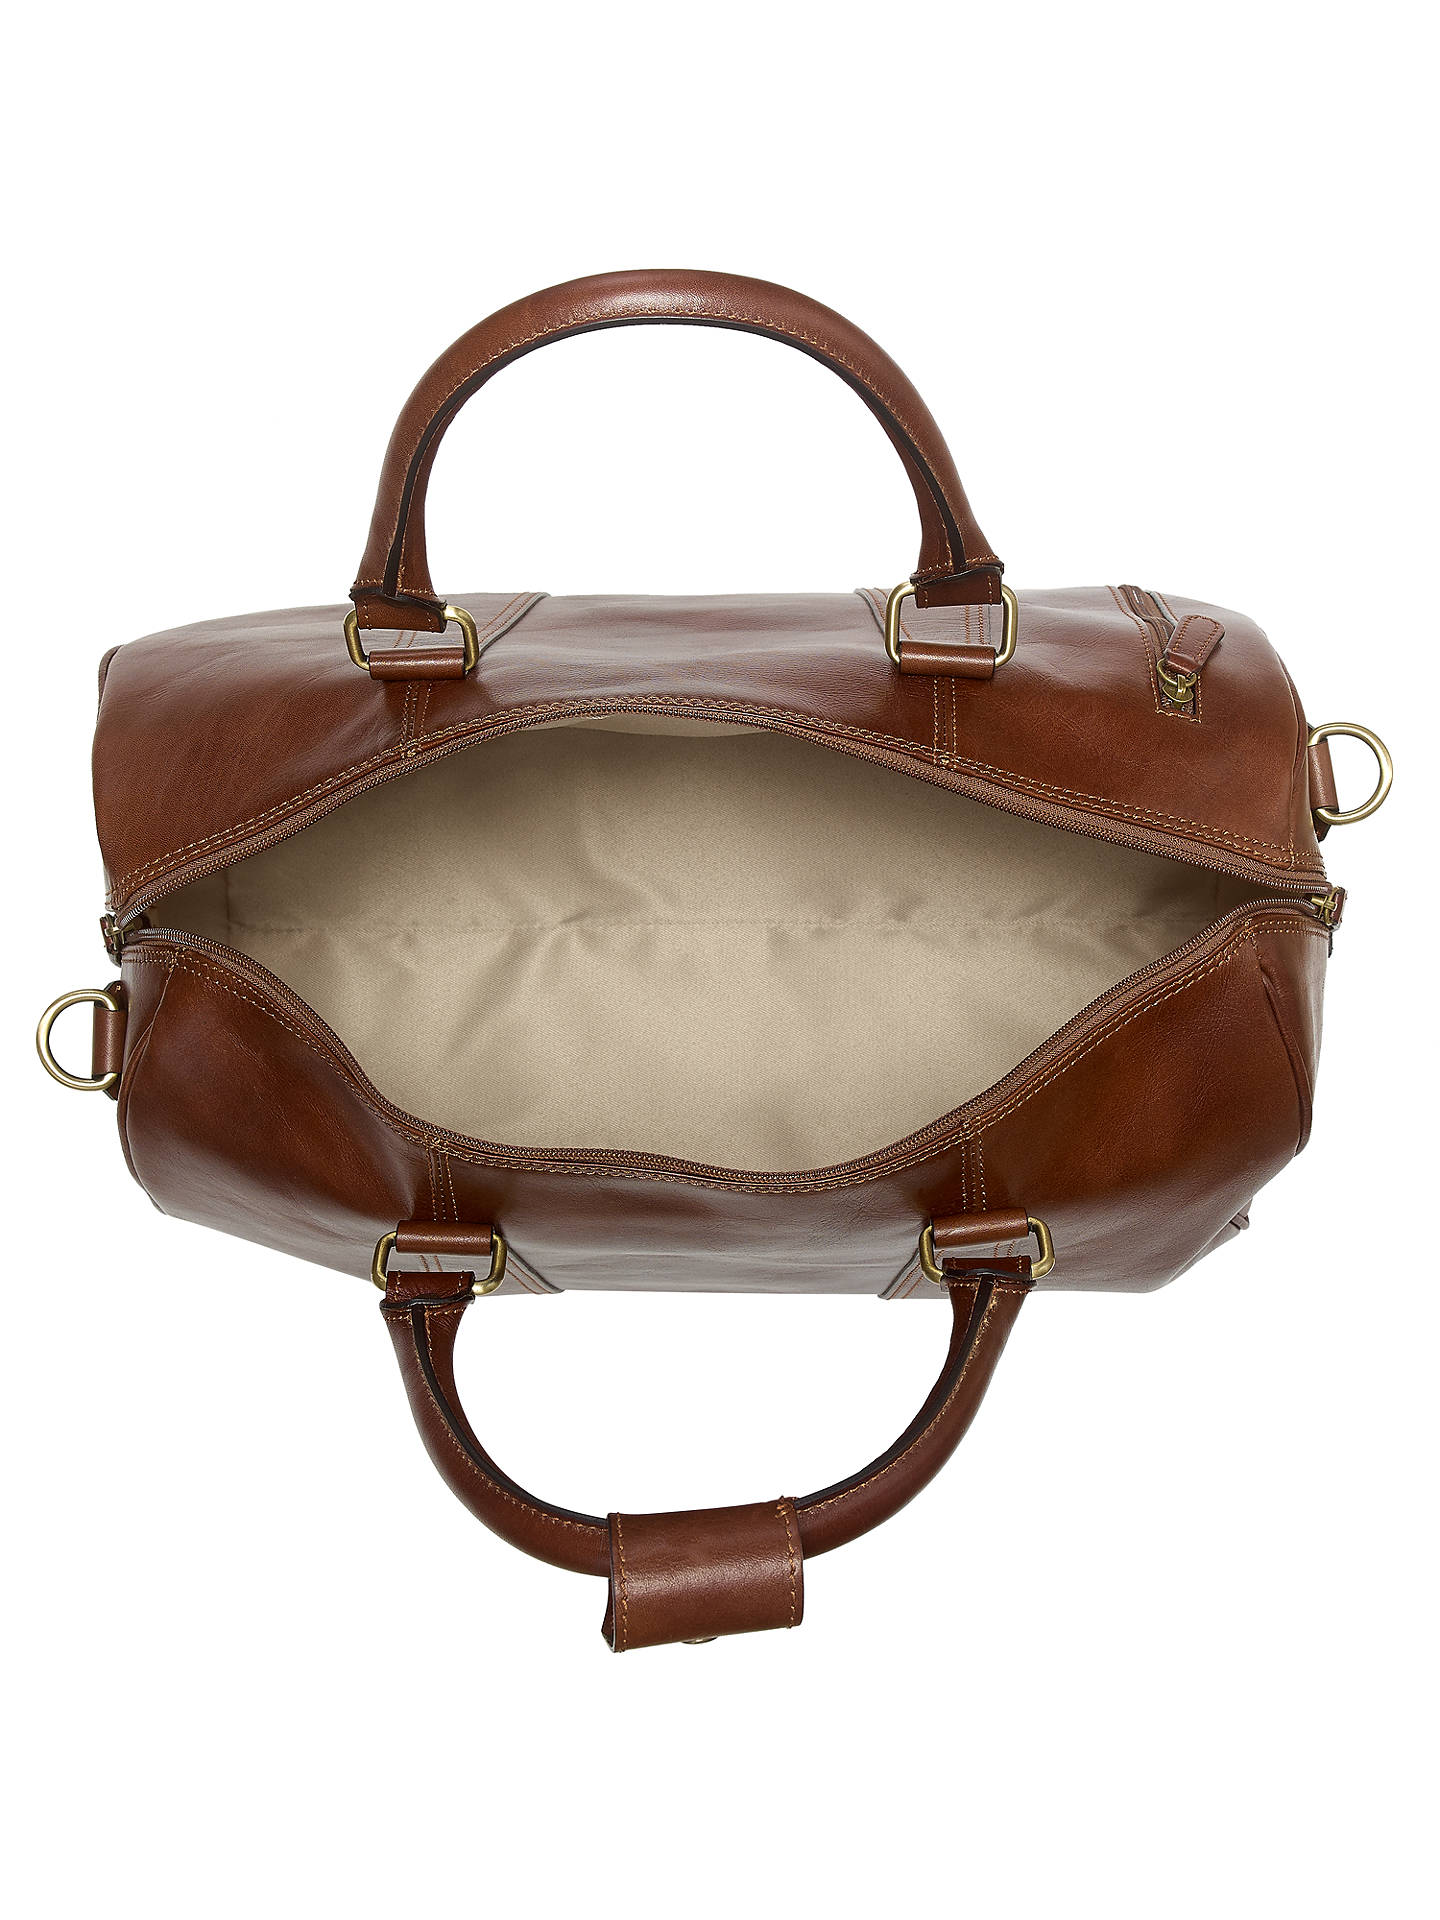 John Lewis Made in Italy Leather Holdall, Brown at John Lewis & Partners